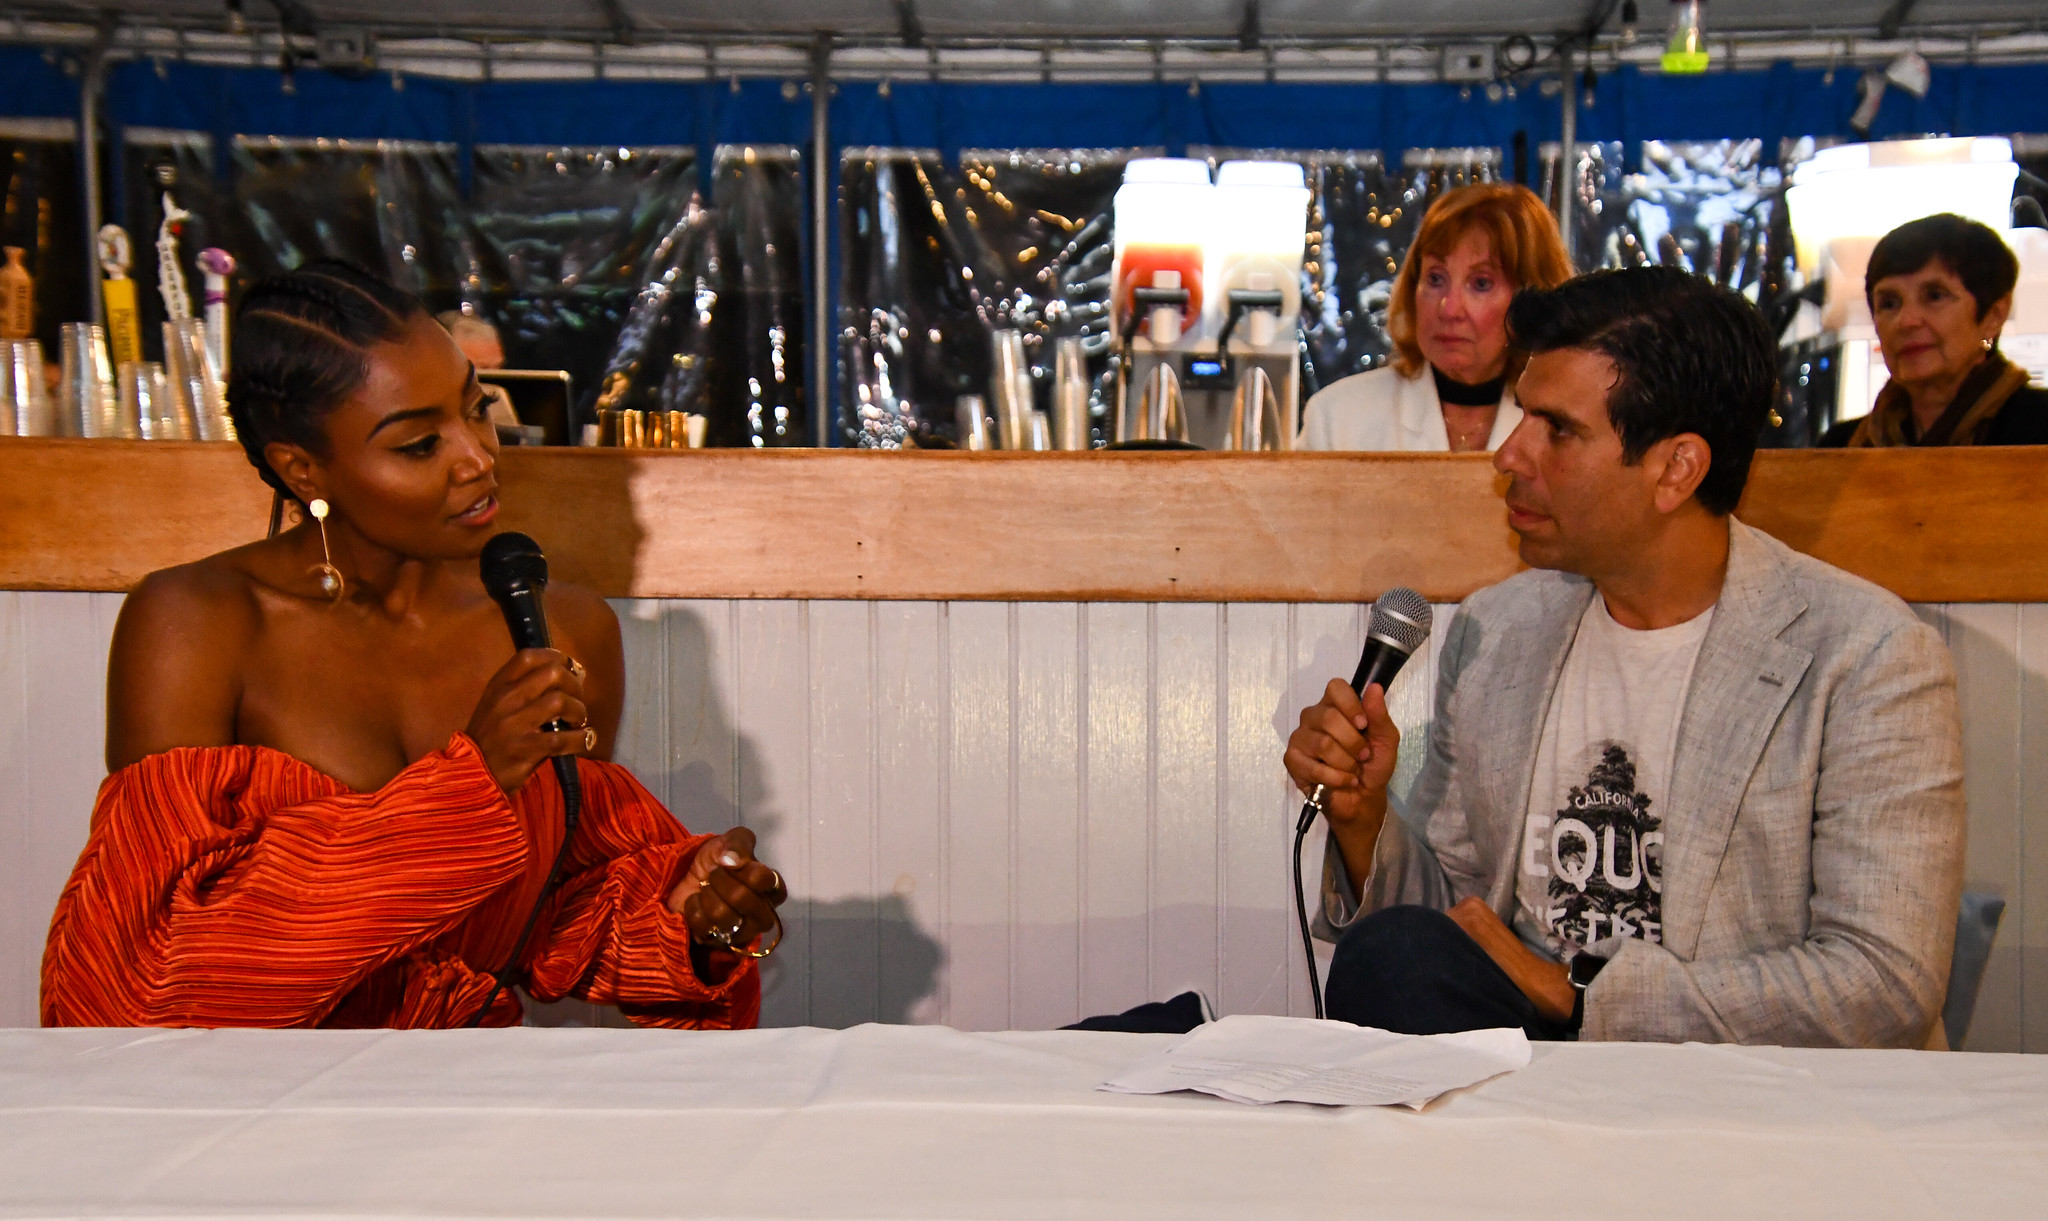 Image 14 Patina Miller having a formal converstation with Elias Plagianos